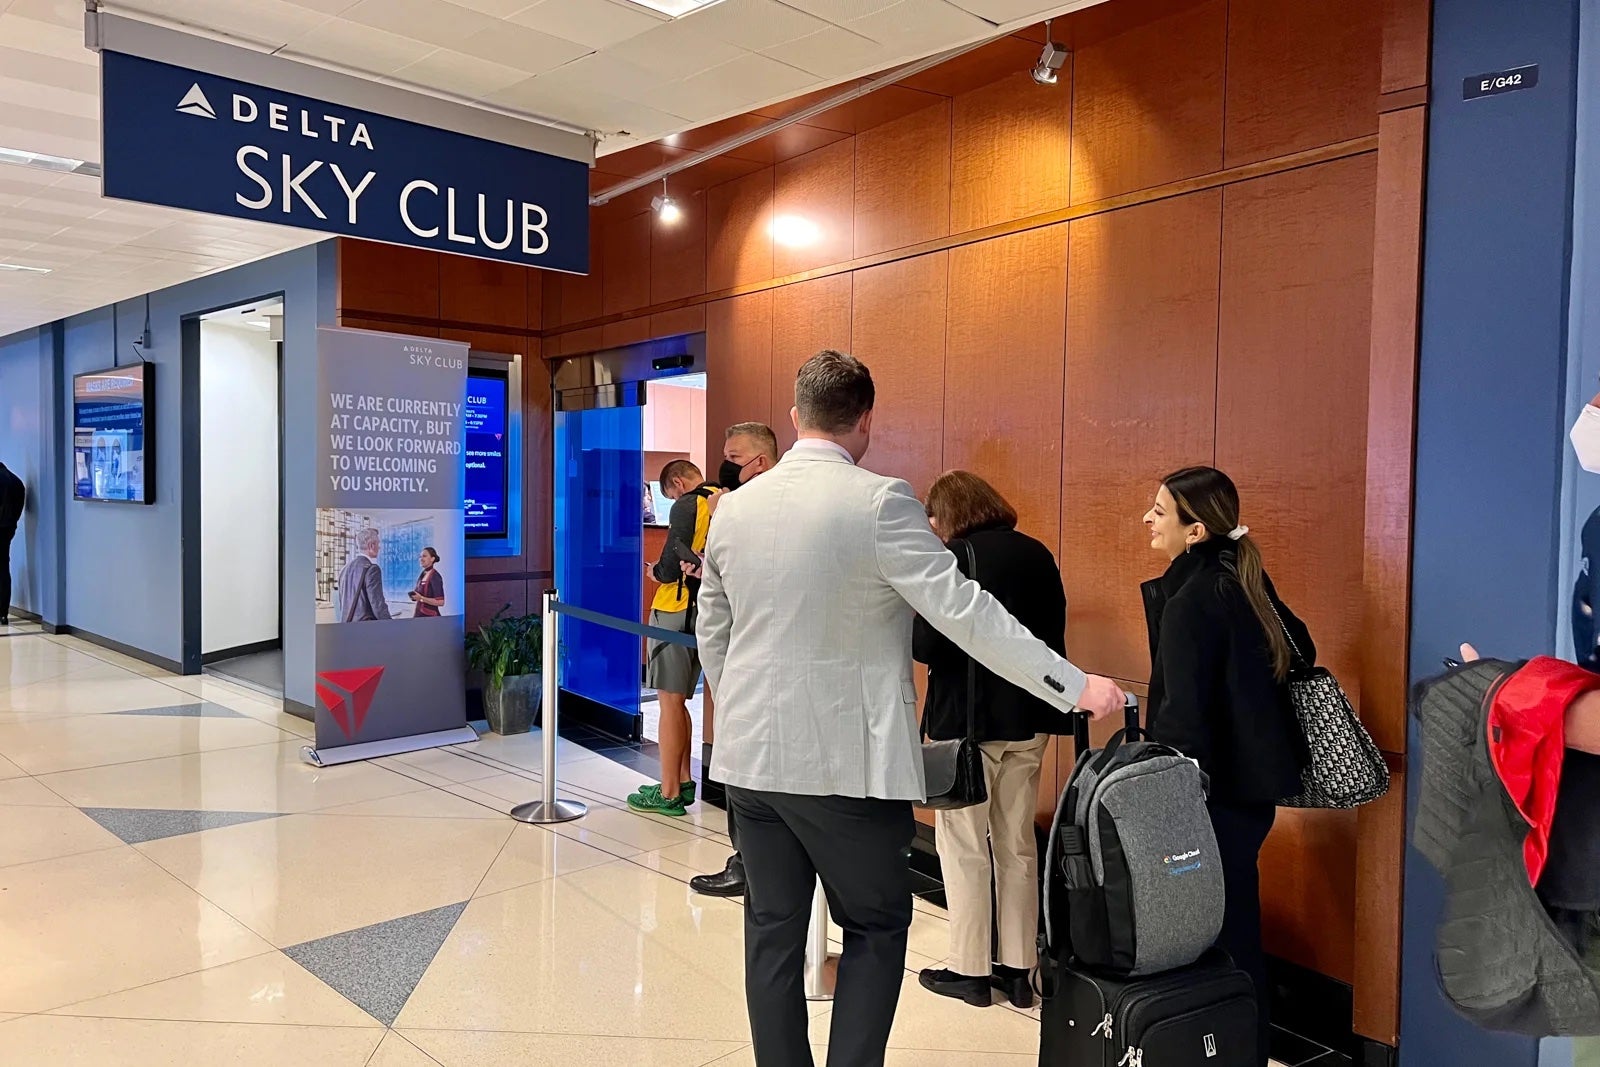 Delta now offers 'priority boarding' at Sky Clubs to skip the wait